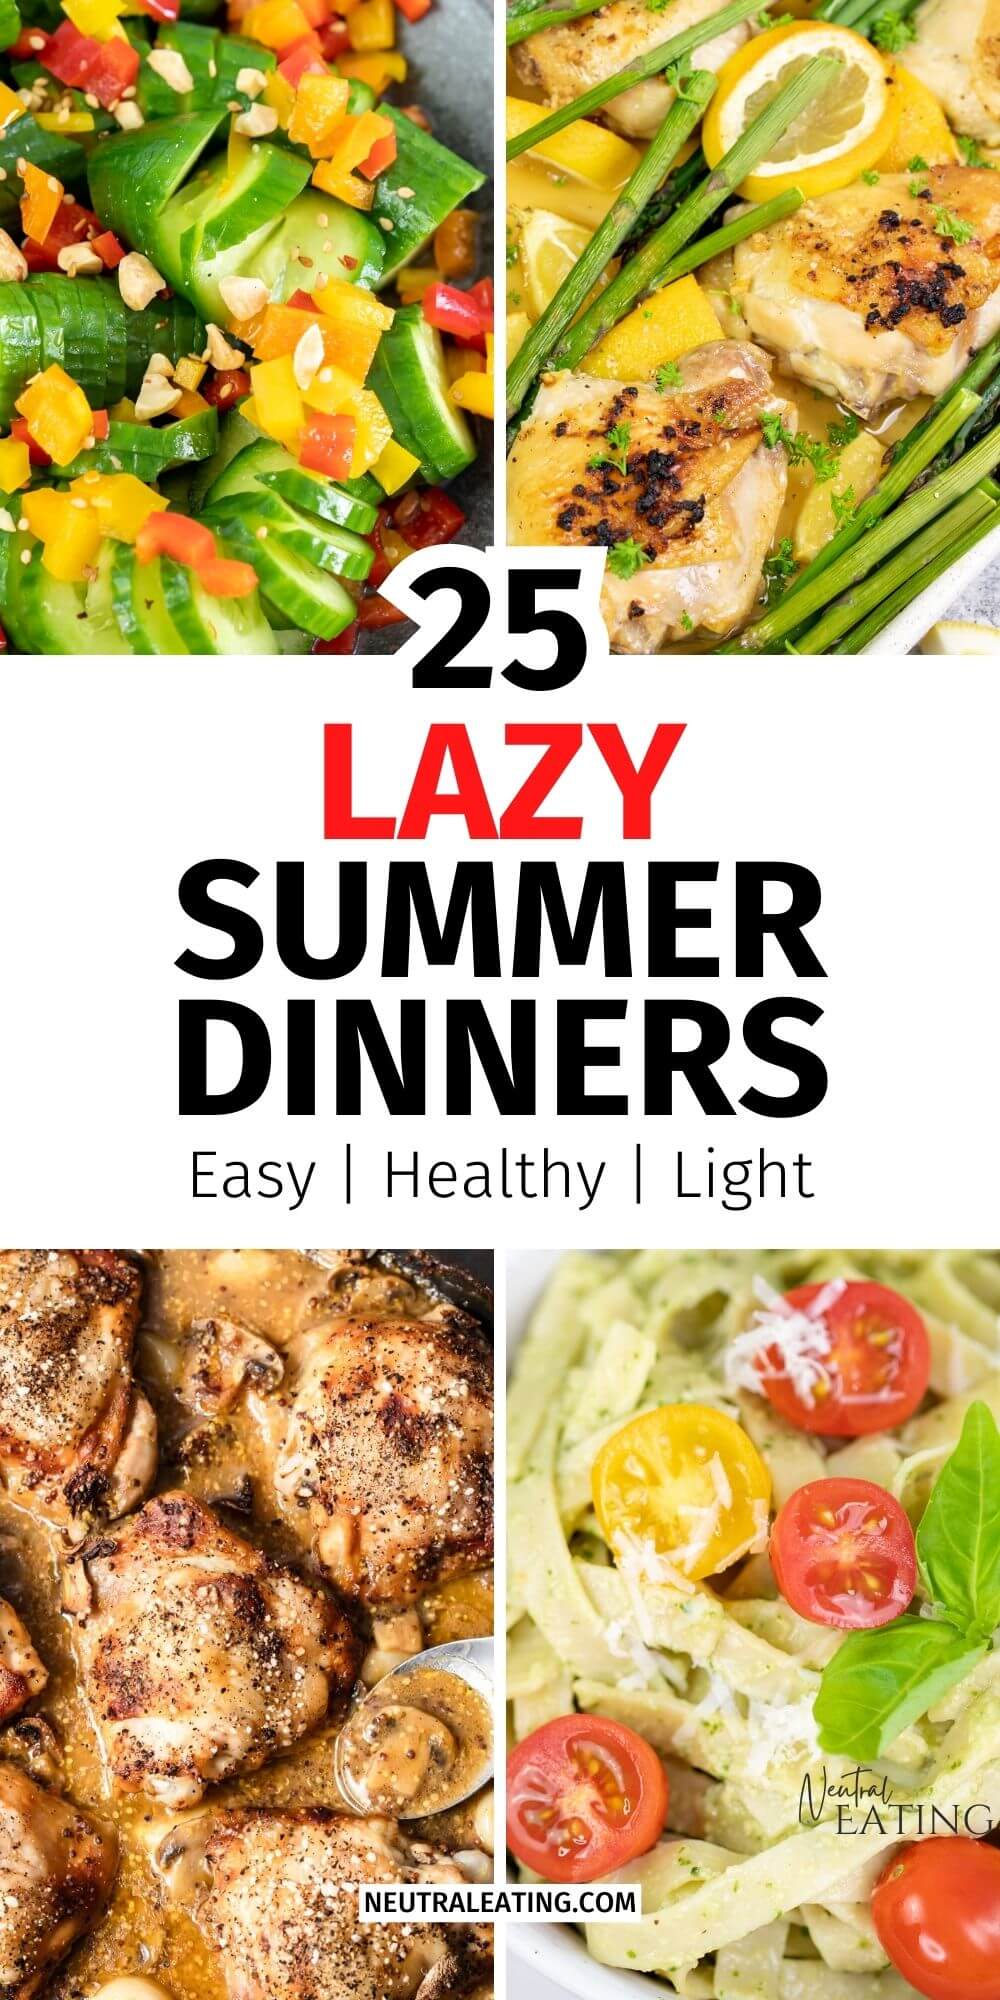 25 Healthy Summer Meals - Neutral Eating